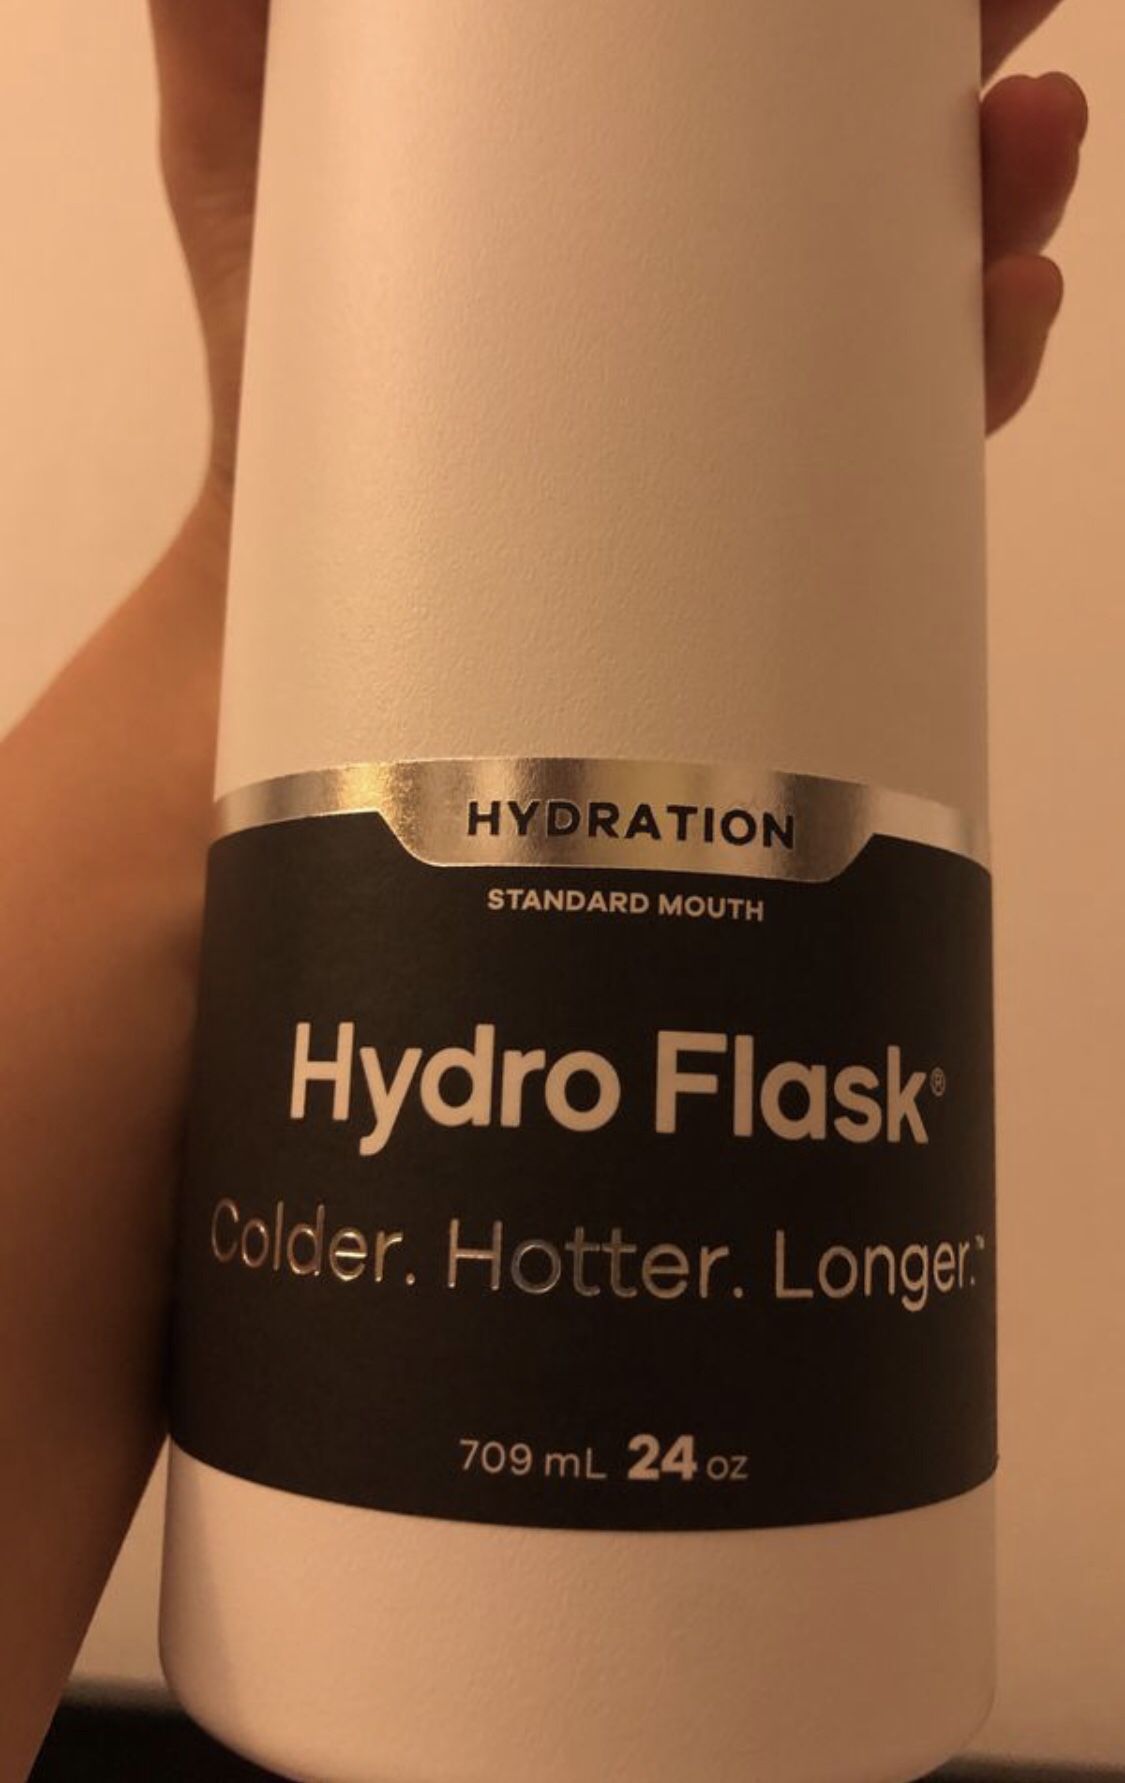 Hydro Flask - 64 Oz. Wide Mouth for Sale in San Jose, CA - OfferUp